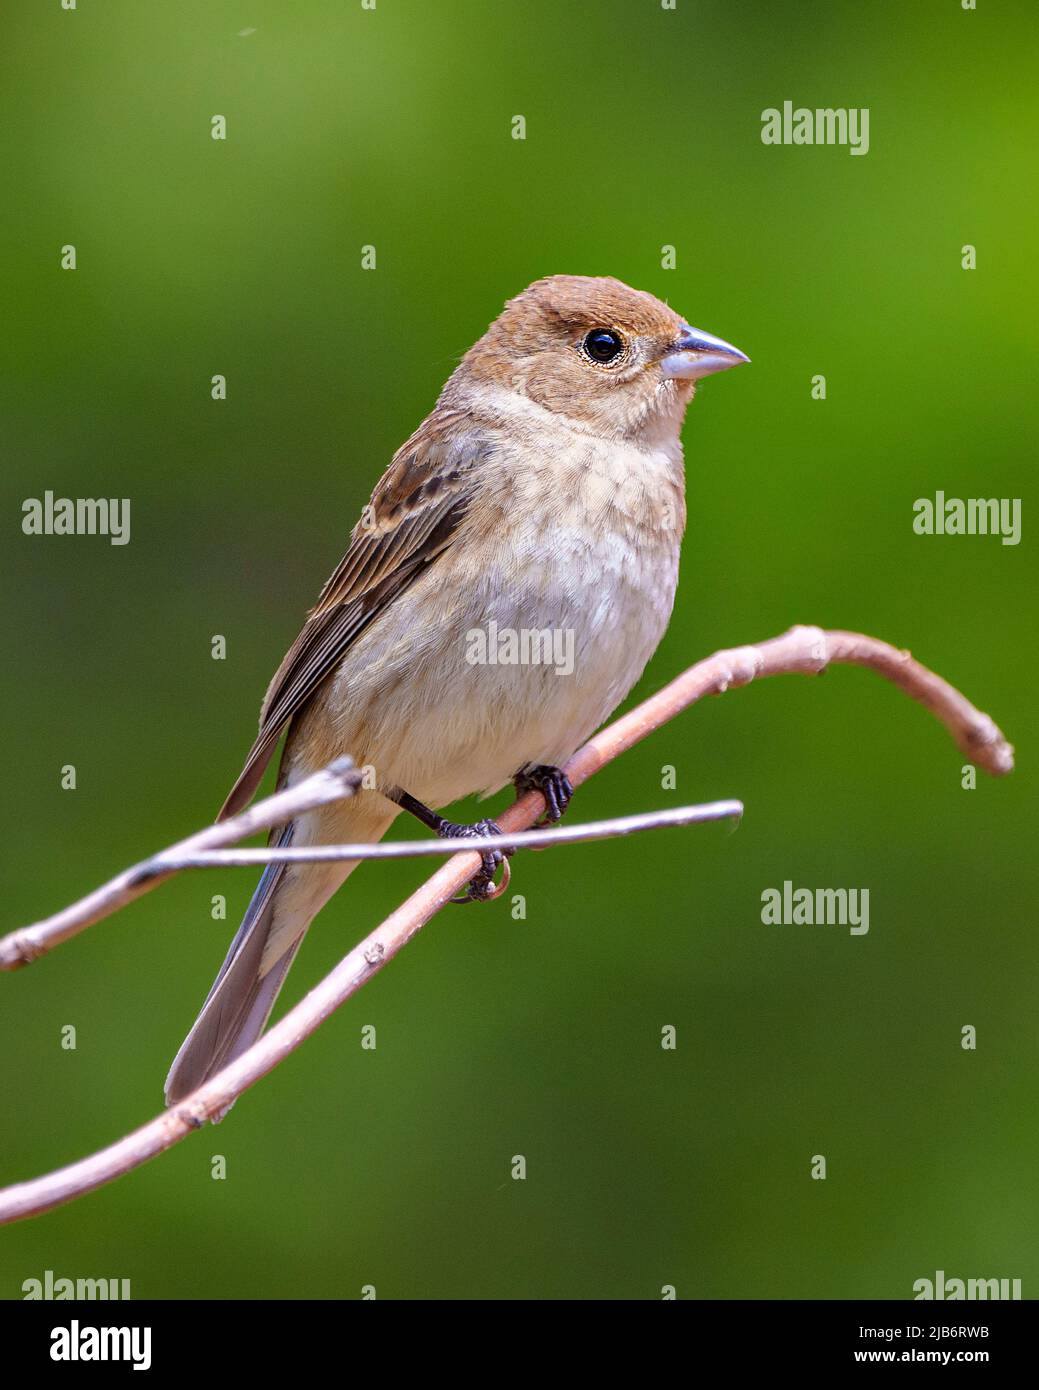 Sparrow close-up perched on a branch with a blur green background  in its environment and habitat surrounding. Coniferous trees. House Brown Sparrow. Stock Photo